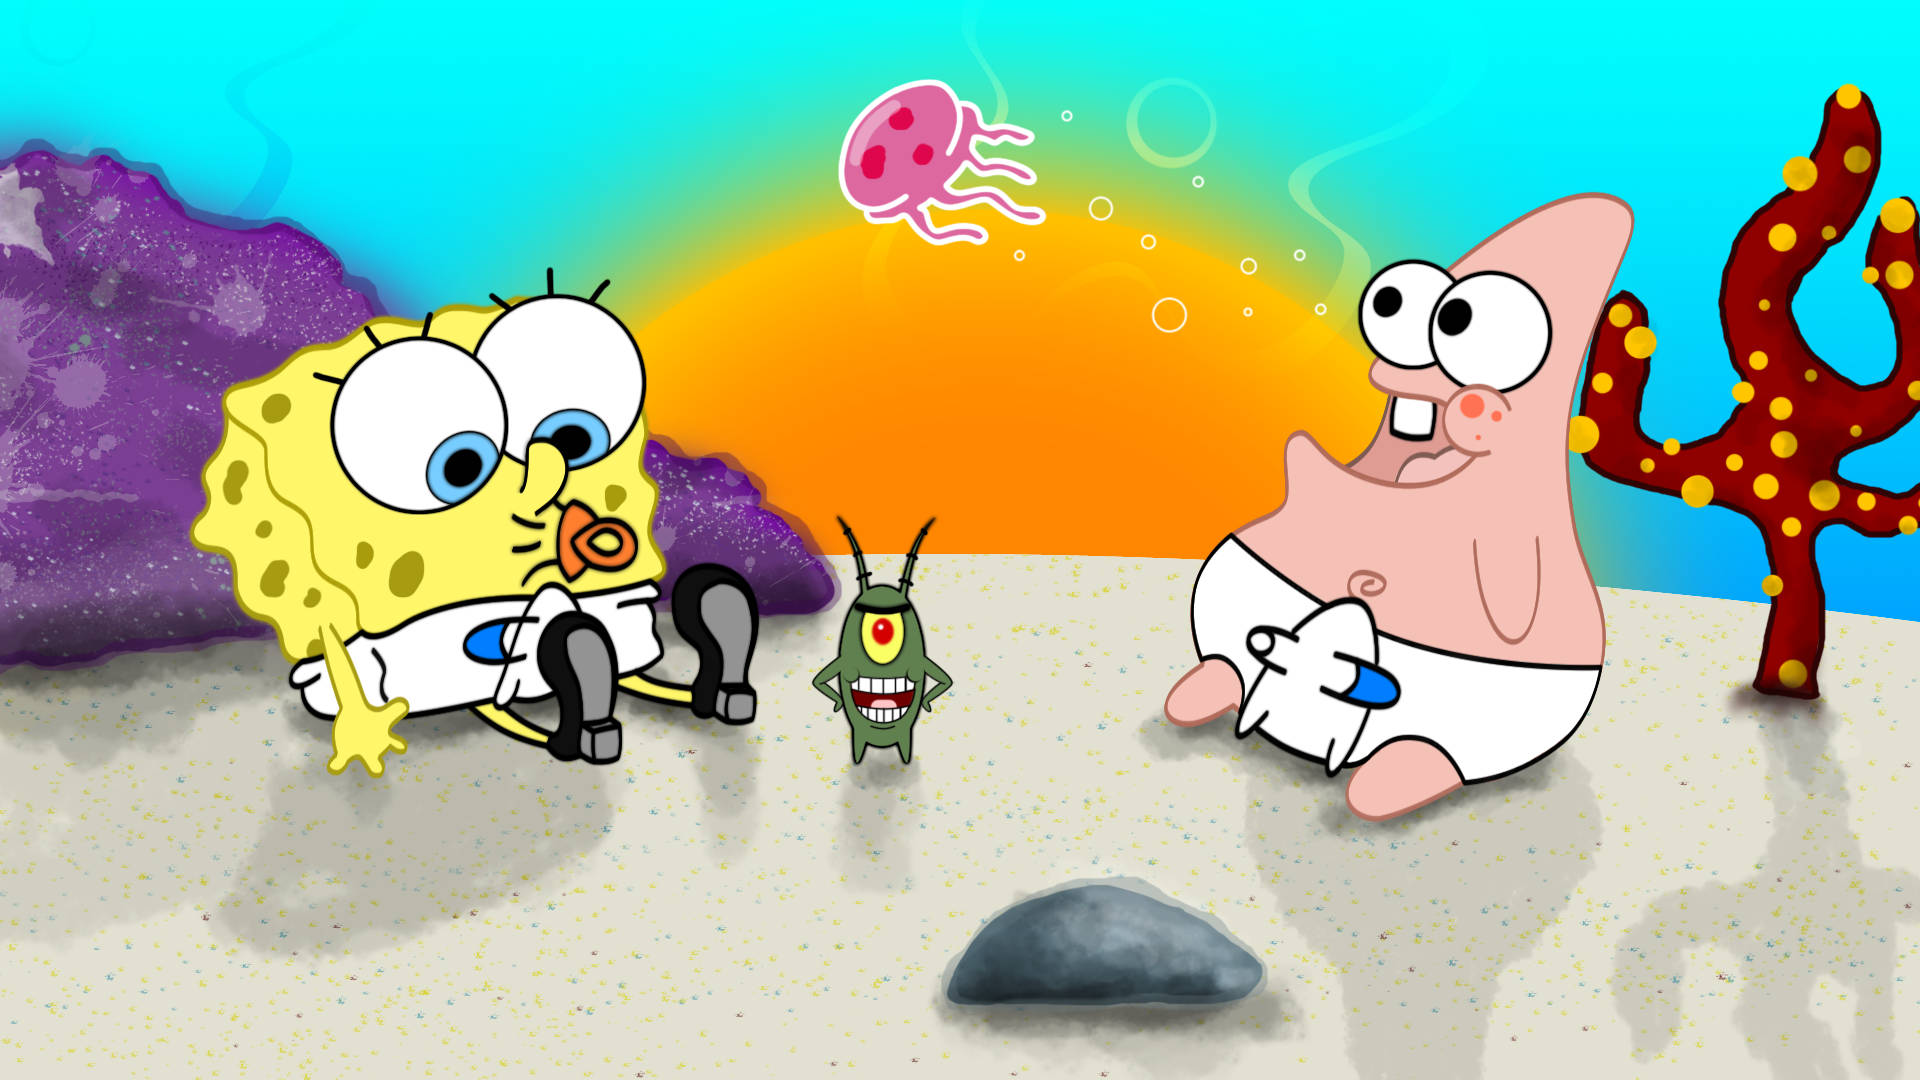 Baby Spongebob And Patrick With Plankton Background